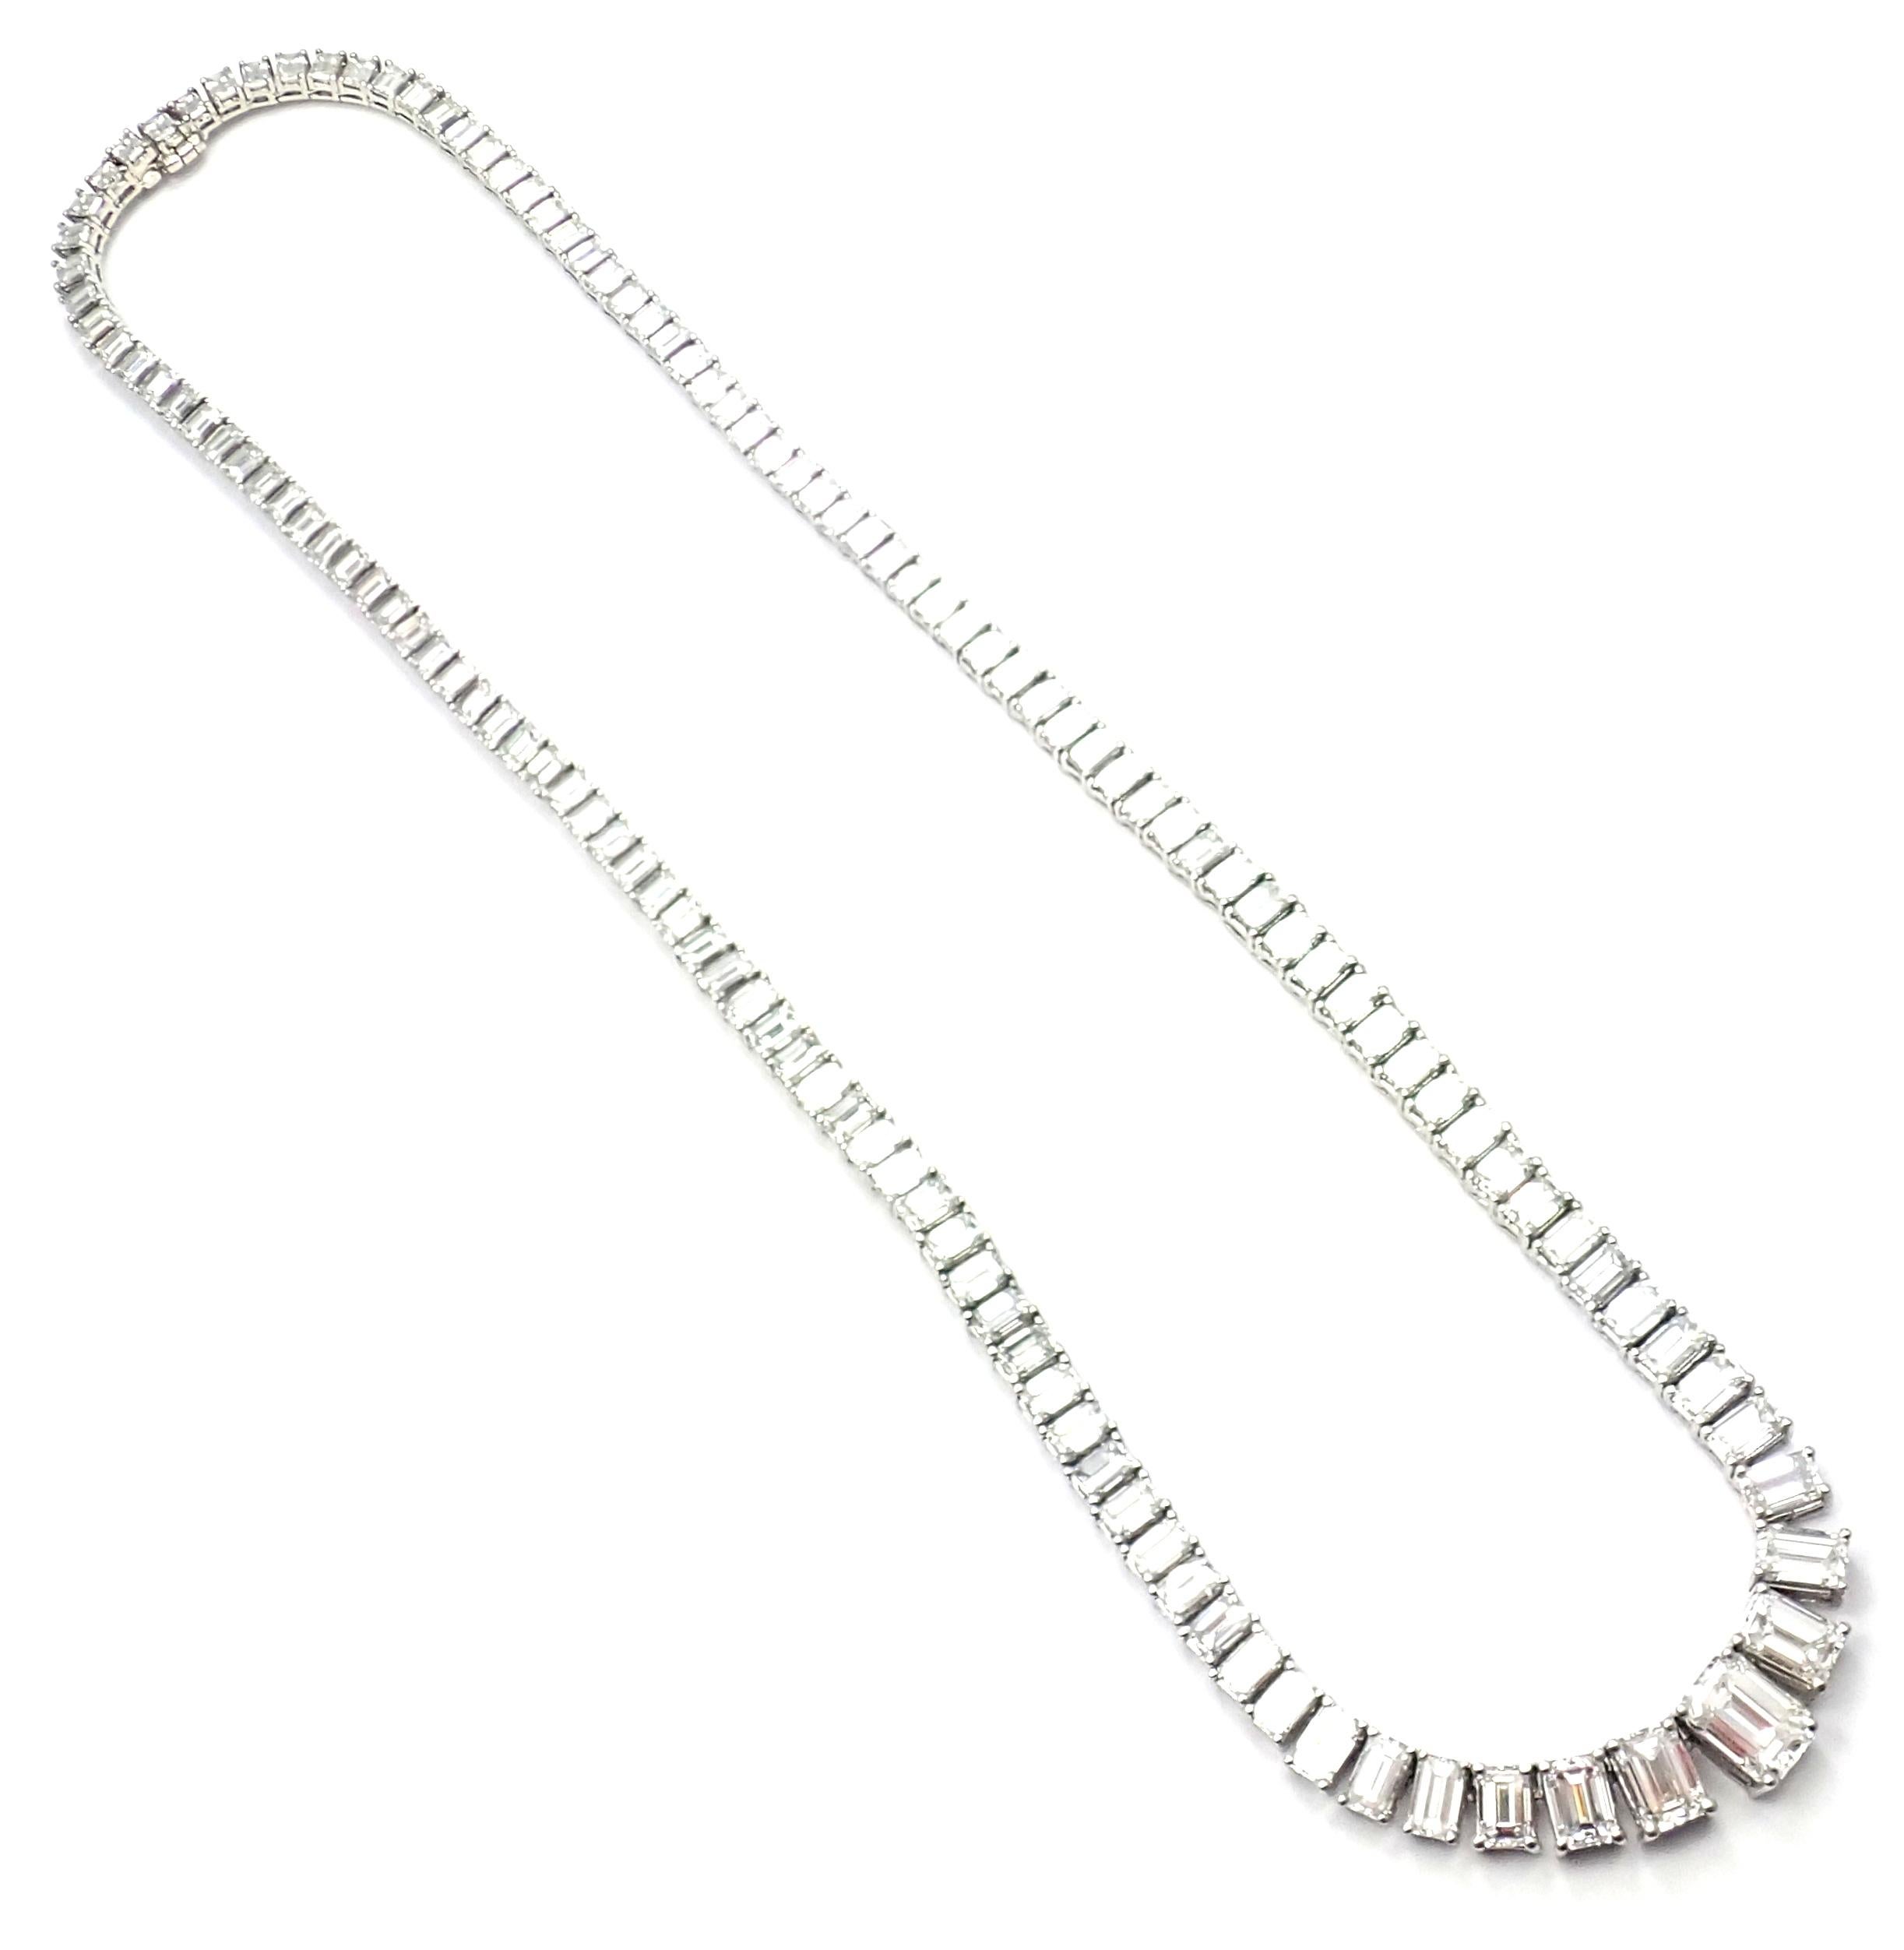 Estate Riviera Platinum 35ct Diamond Tennis Necklace.
With 127 emerald cut diamonds, the largest one comes with GIA report for VVS1 clarity, F color total weigh of all the diamonds is approximately 35ct
This necklace comes with GIA certificate for